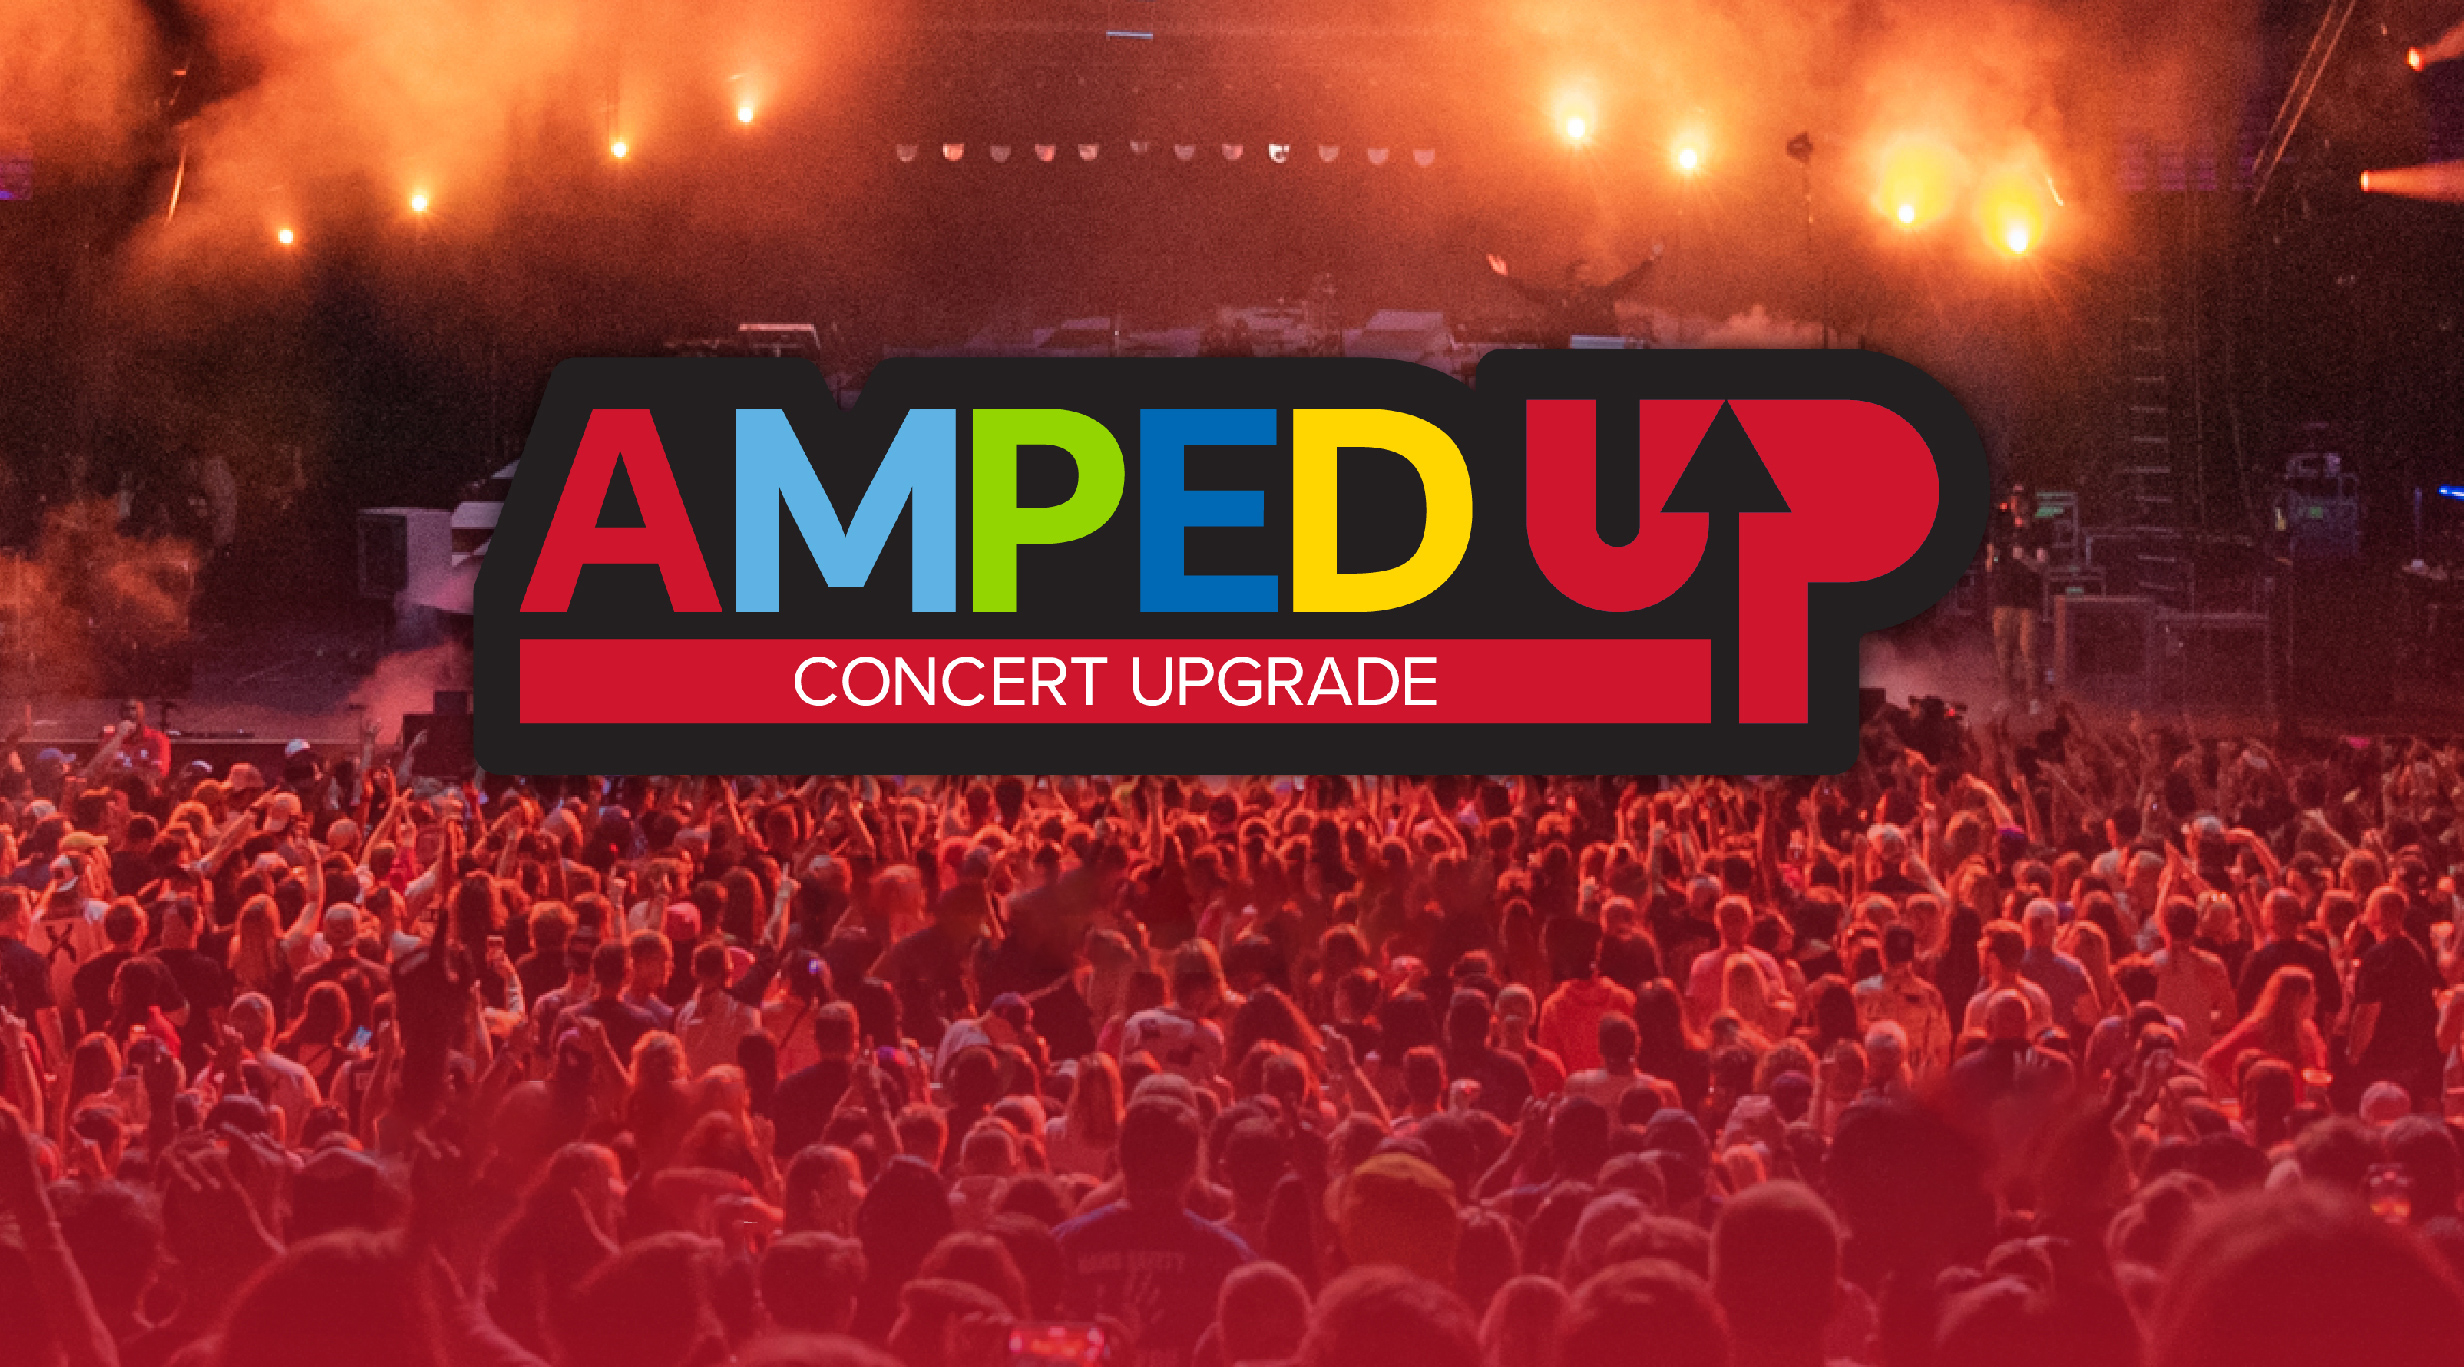 Keith Urban Amped Up Concert Upgrade-not A Concert Ticket